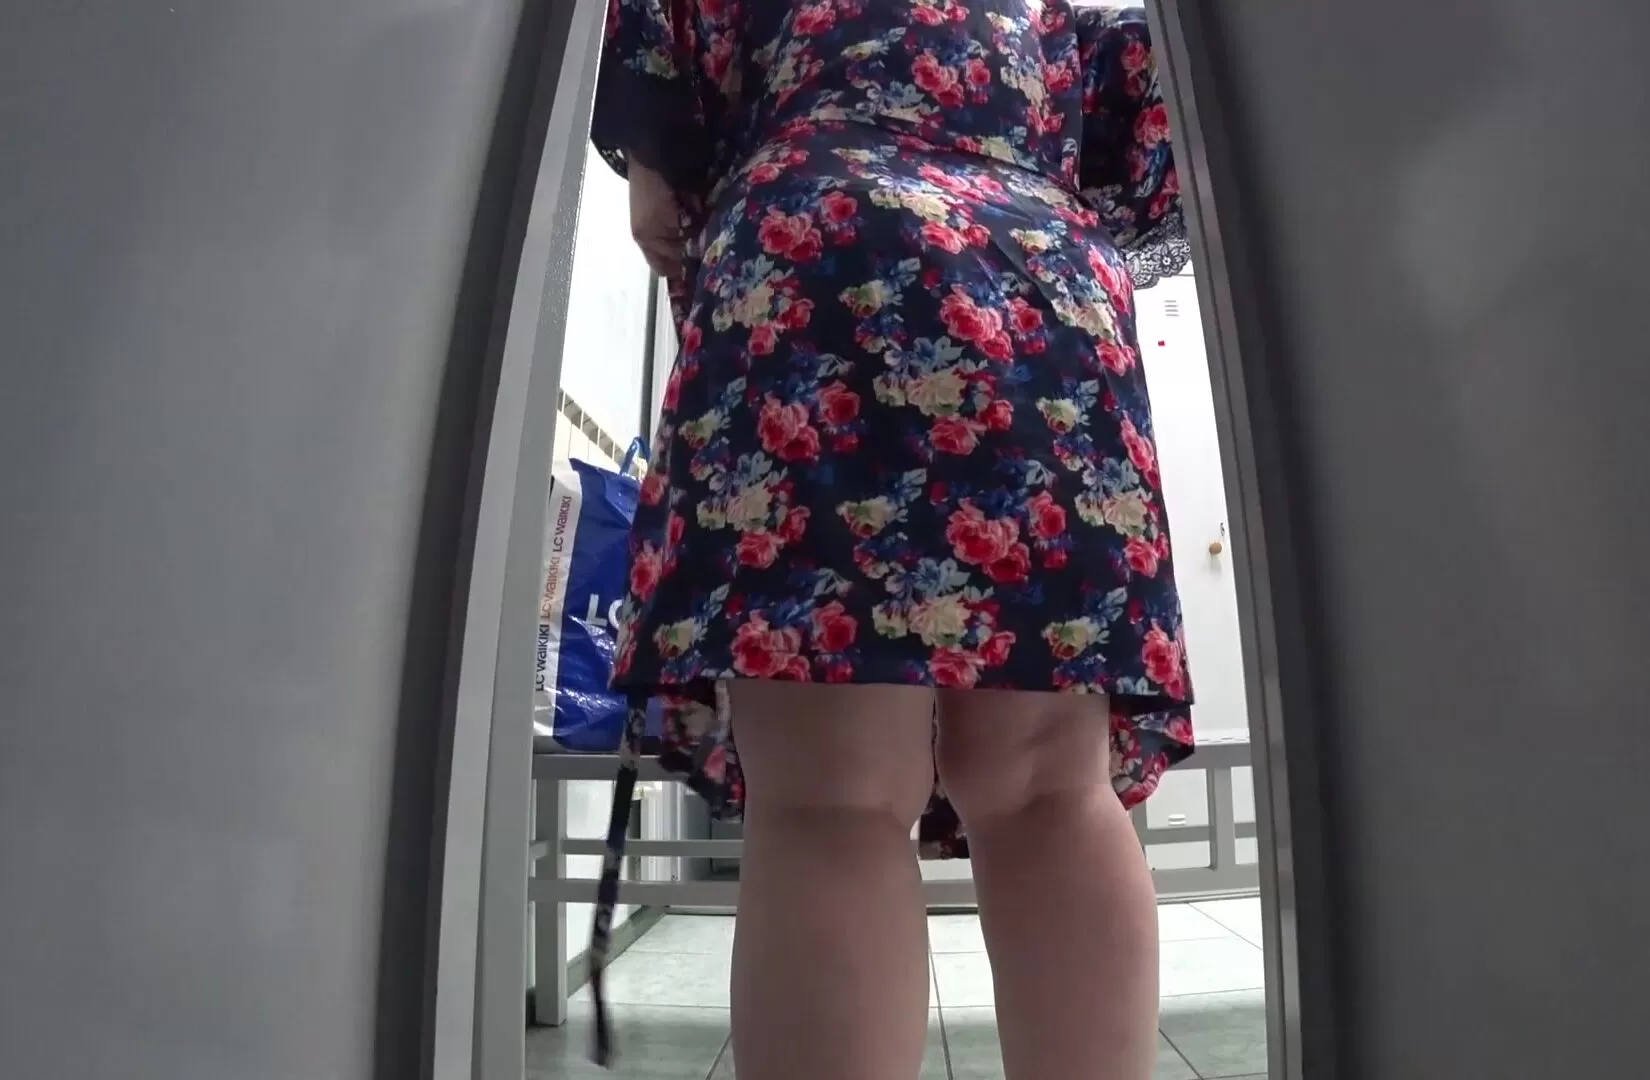 Hidden cam in the public locker room at the pool spying on a mature milf with a juicy ass, big boobs, hairy pussy and a plump belly. Amateur fetish picture